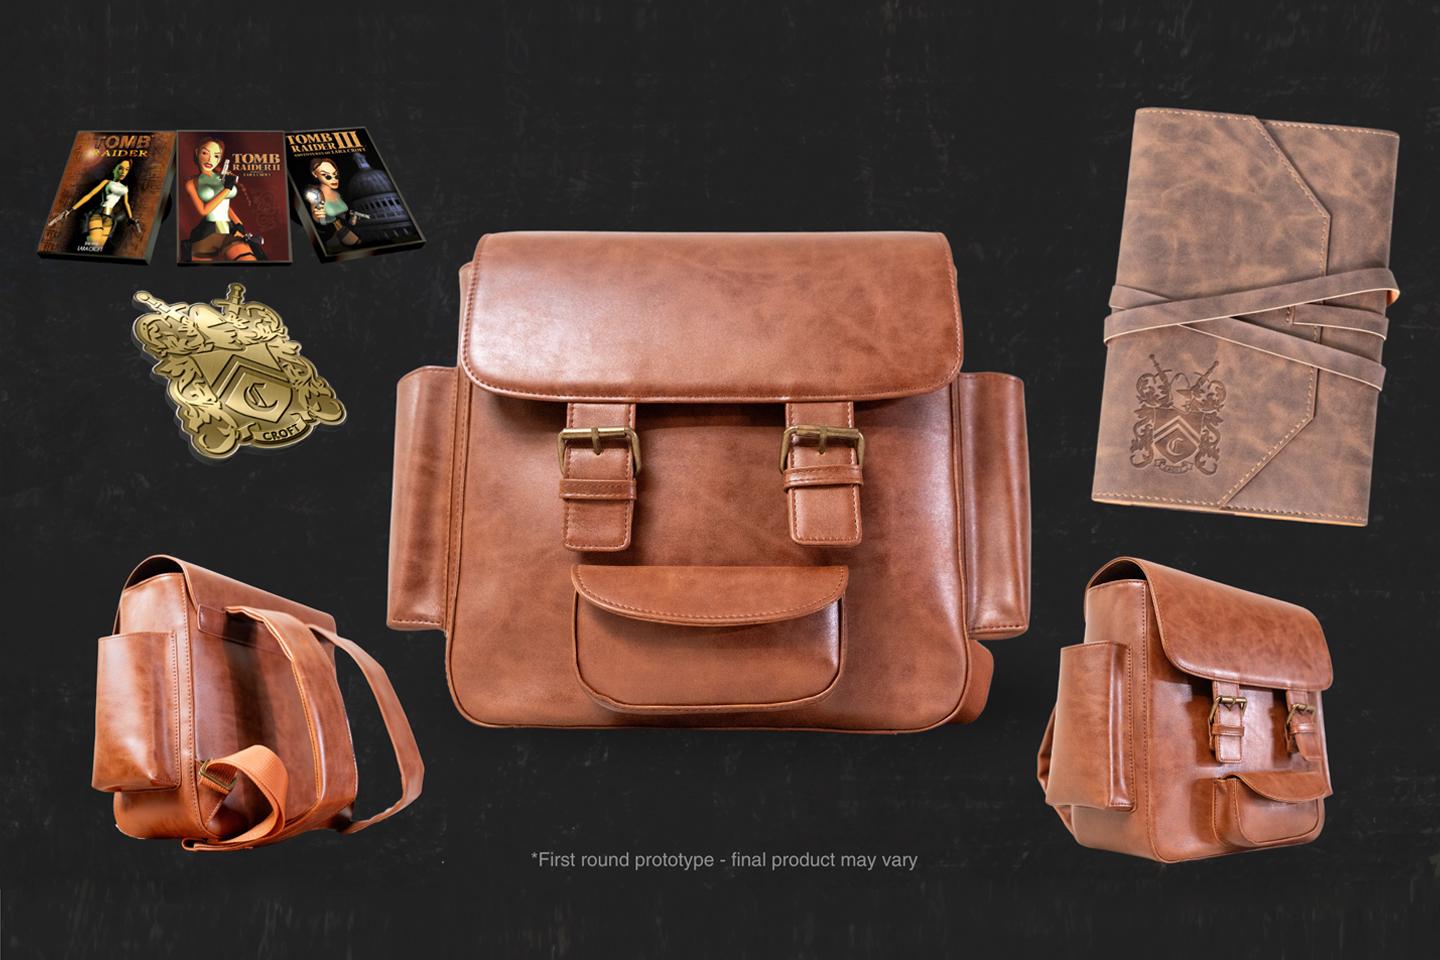 A product image depicting a replica of Lara Croft's backpack, a leather journal, and Tomb Raider game cover-themed collectible pins.